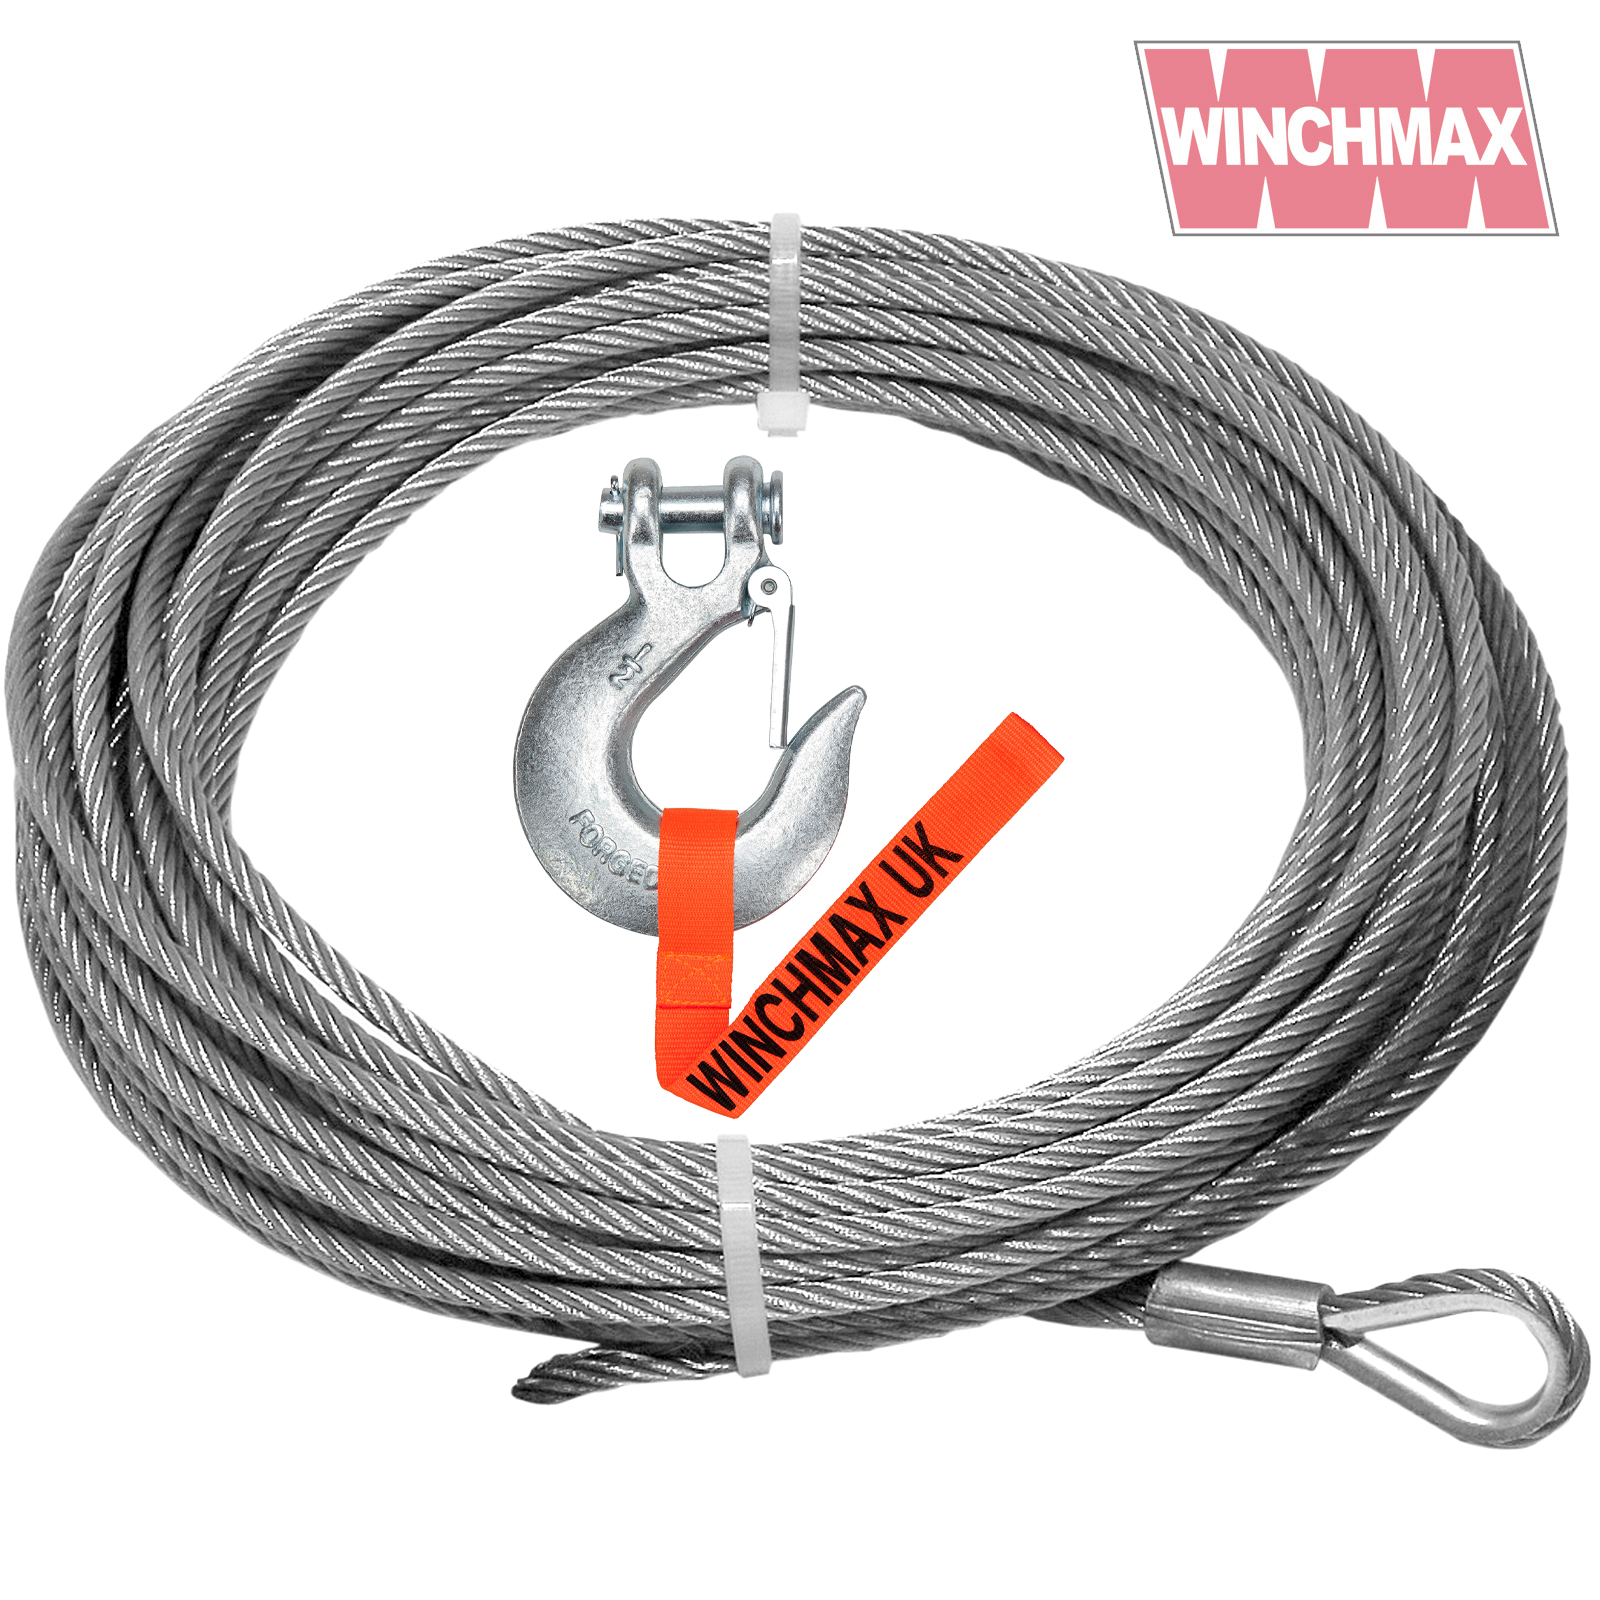 WINCHMAX Steel Rope 26mX14mm and 1/2 Inch Hook